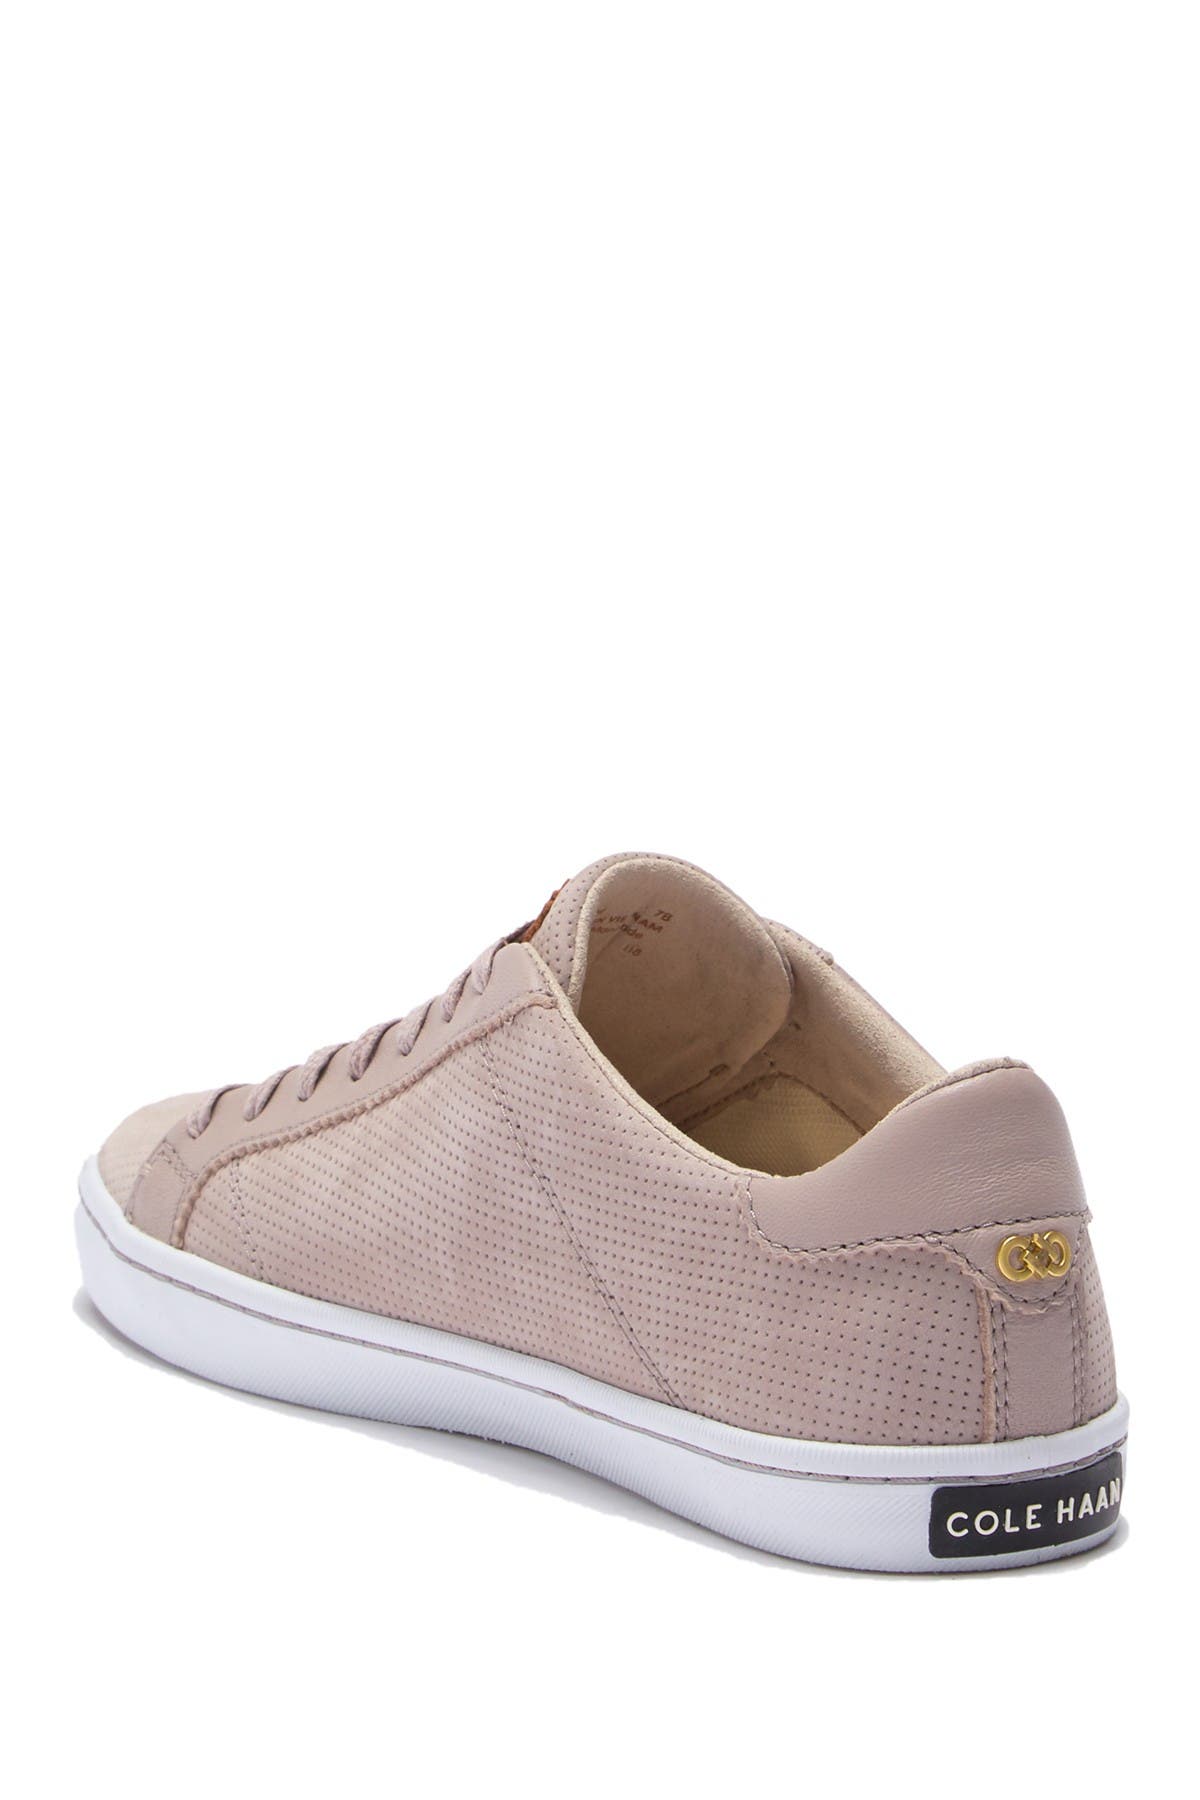 margo lace up cole haan